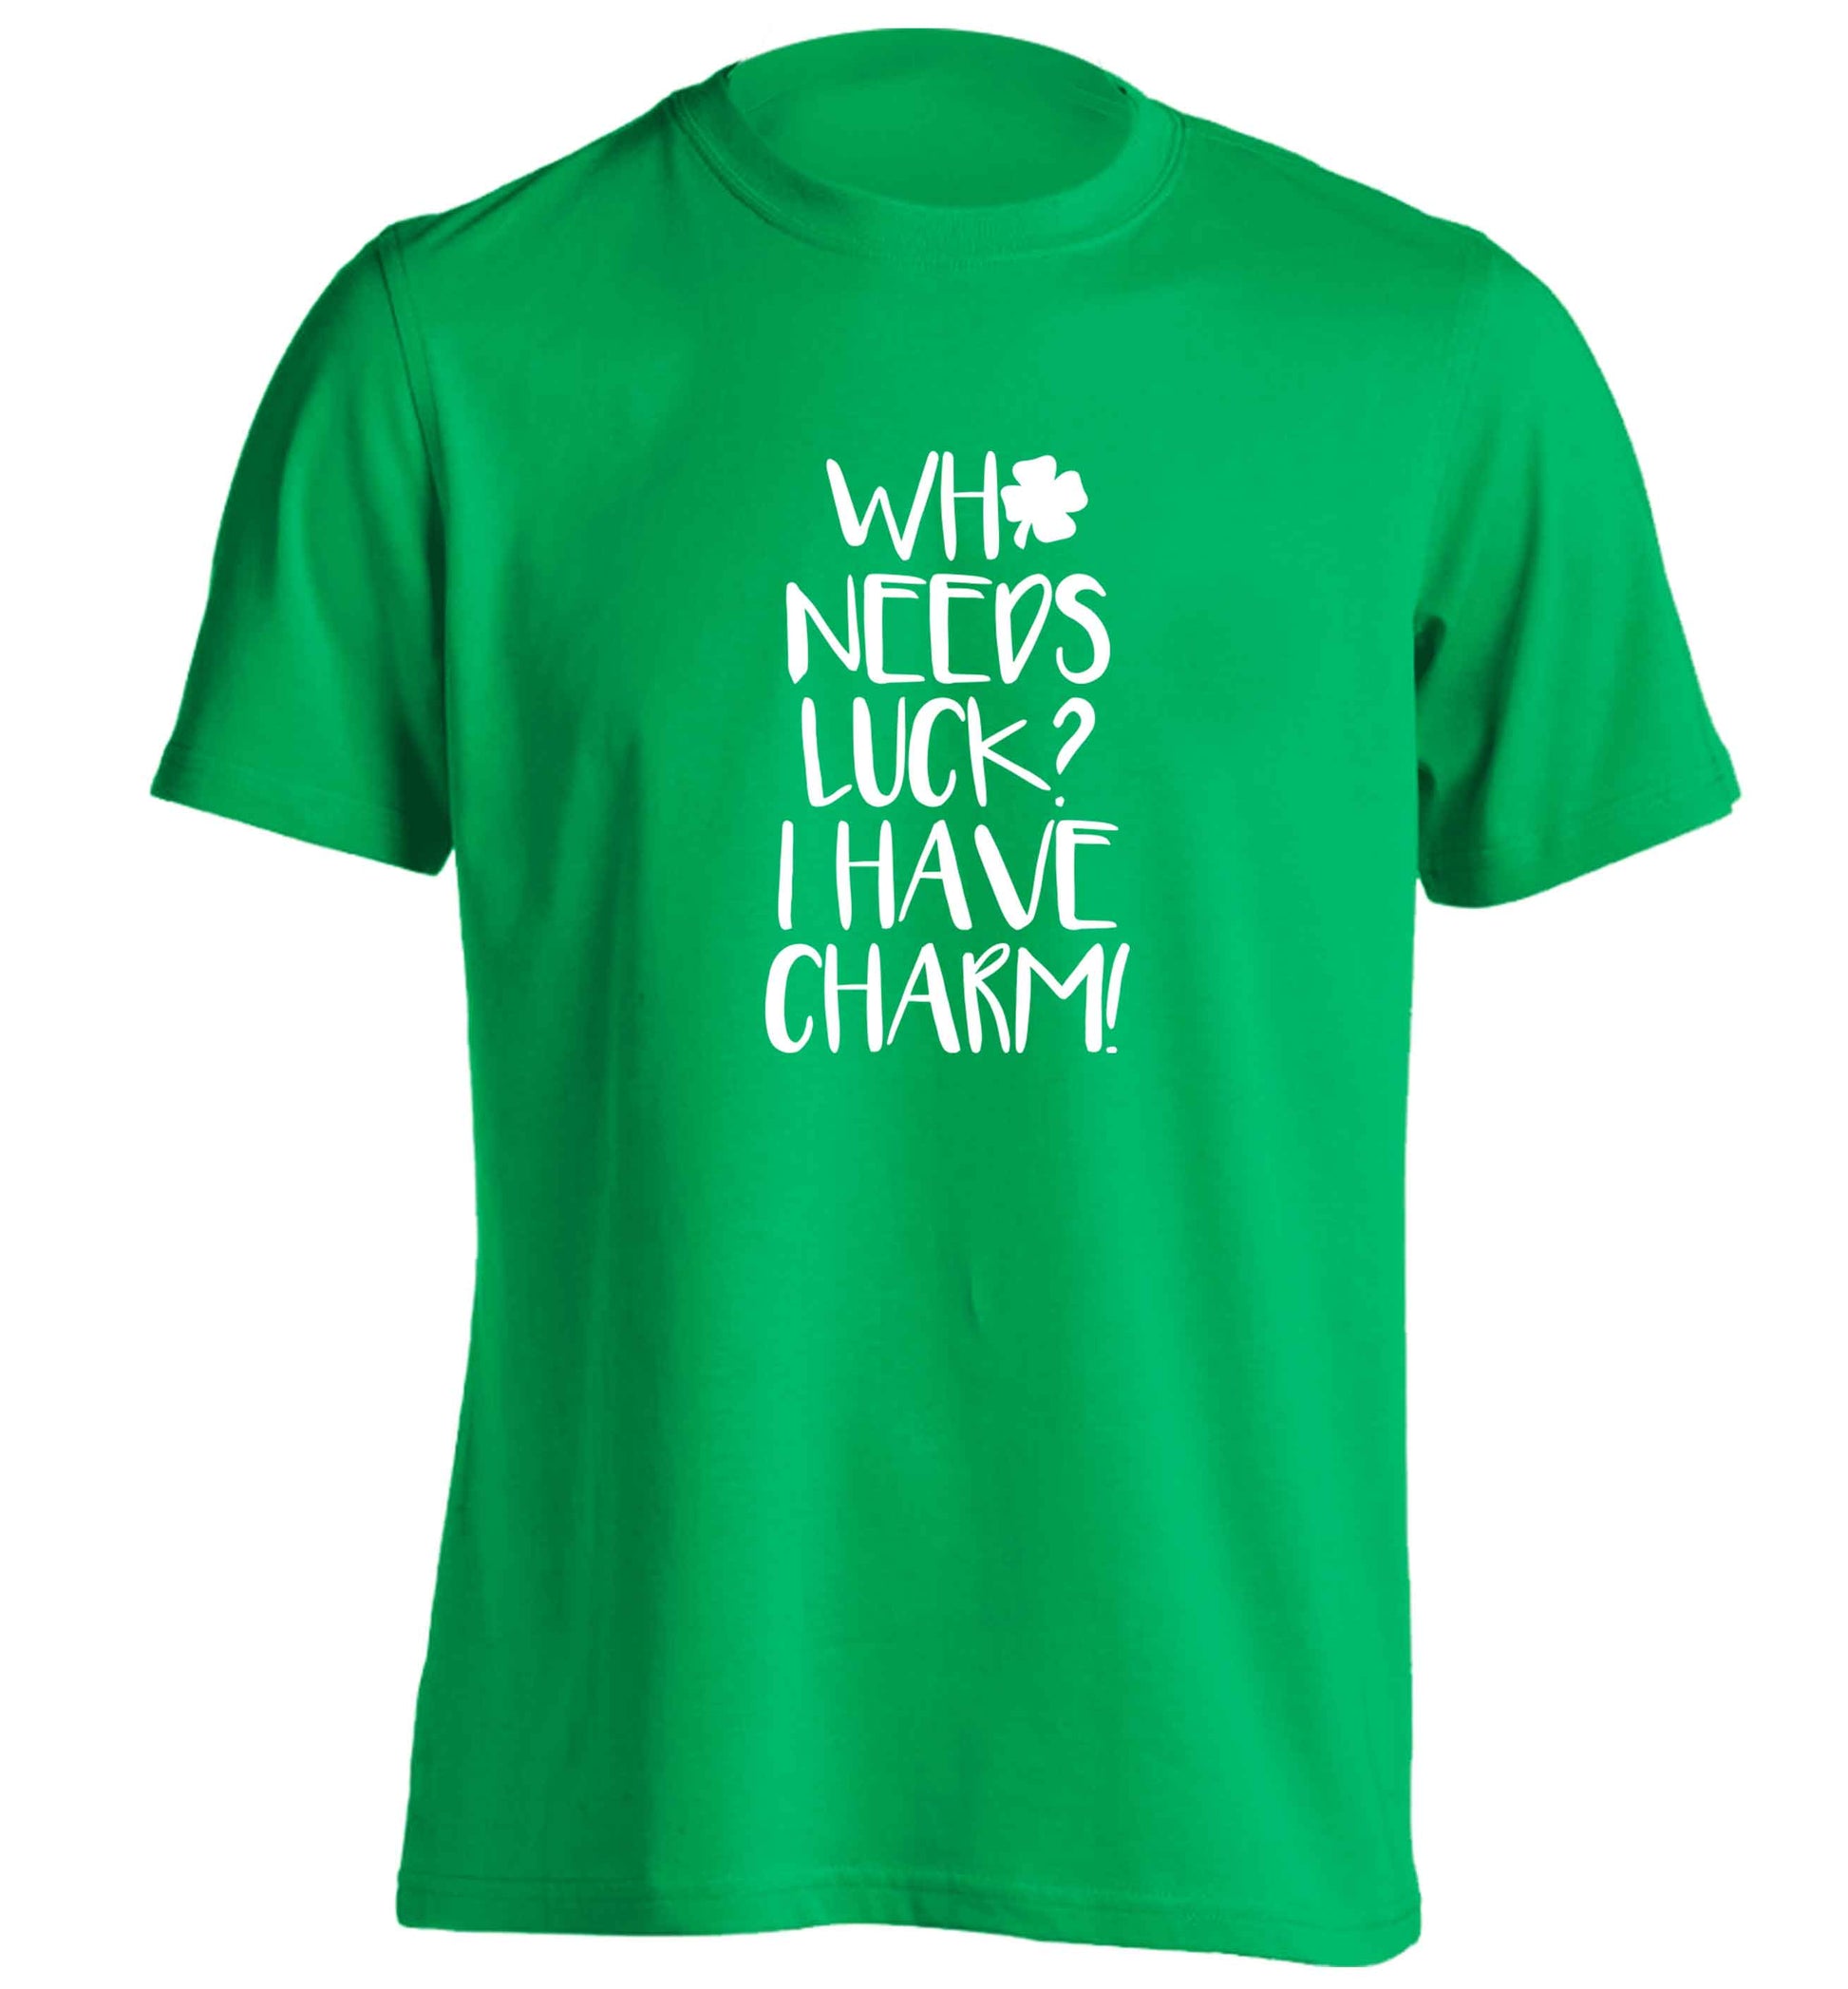 Who needs luck? I have charm! adults unisex green Tshirt 2XL